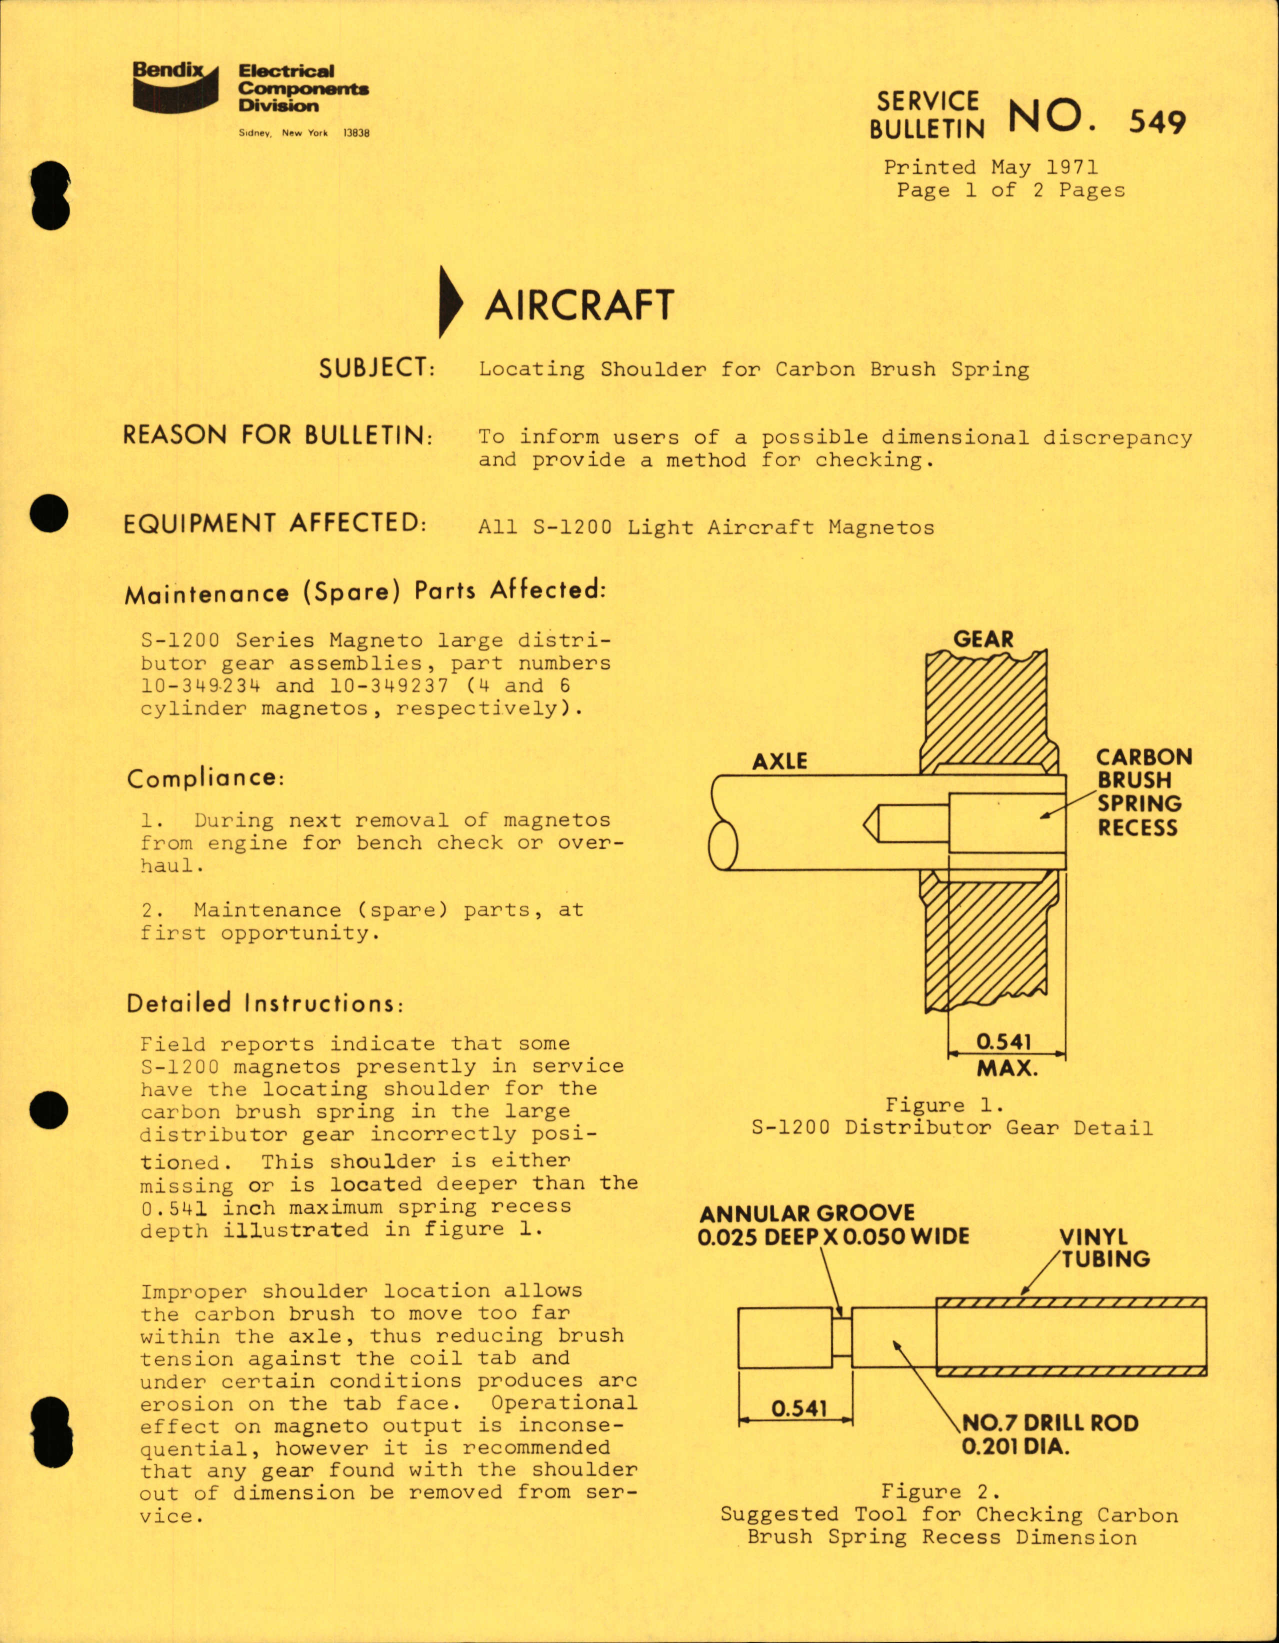 Sample page 1 from AirCorps Library document: Locating Shoulder for Carbon Brush Spring